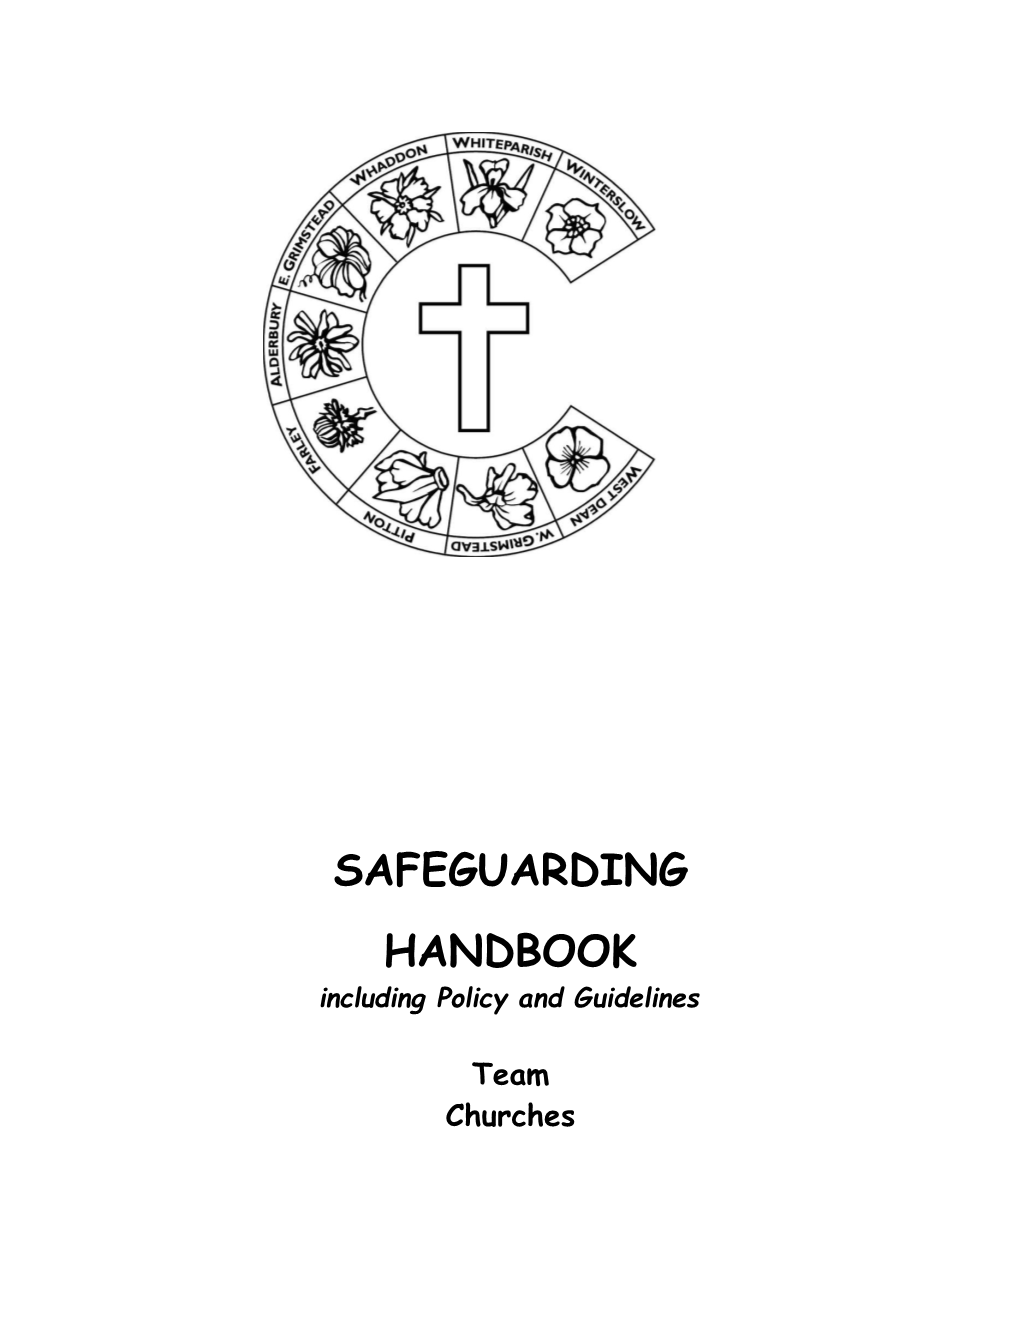 Christ Church Safeguarding Handbook Including Policy and Guidelines - July 12 - 090712